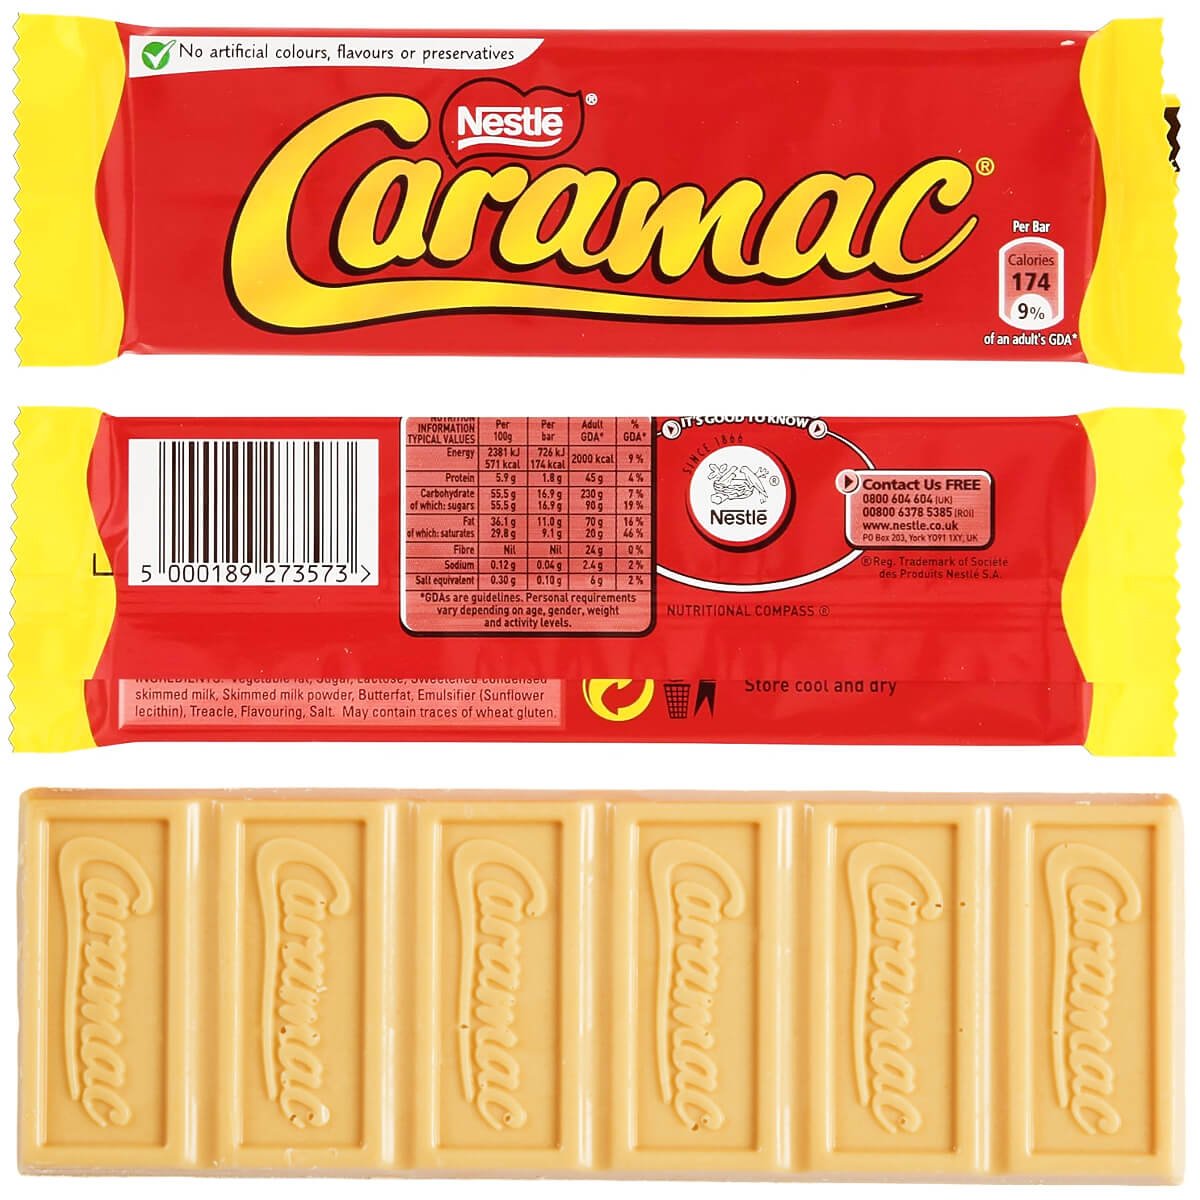 Nestle Caramac wrapper from 2023 (red and yellow) and loose bar with six segments.